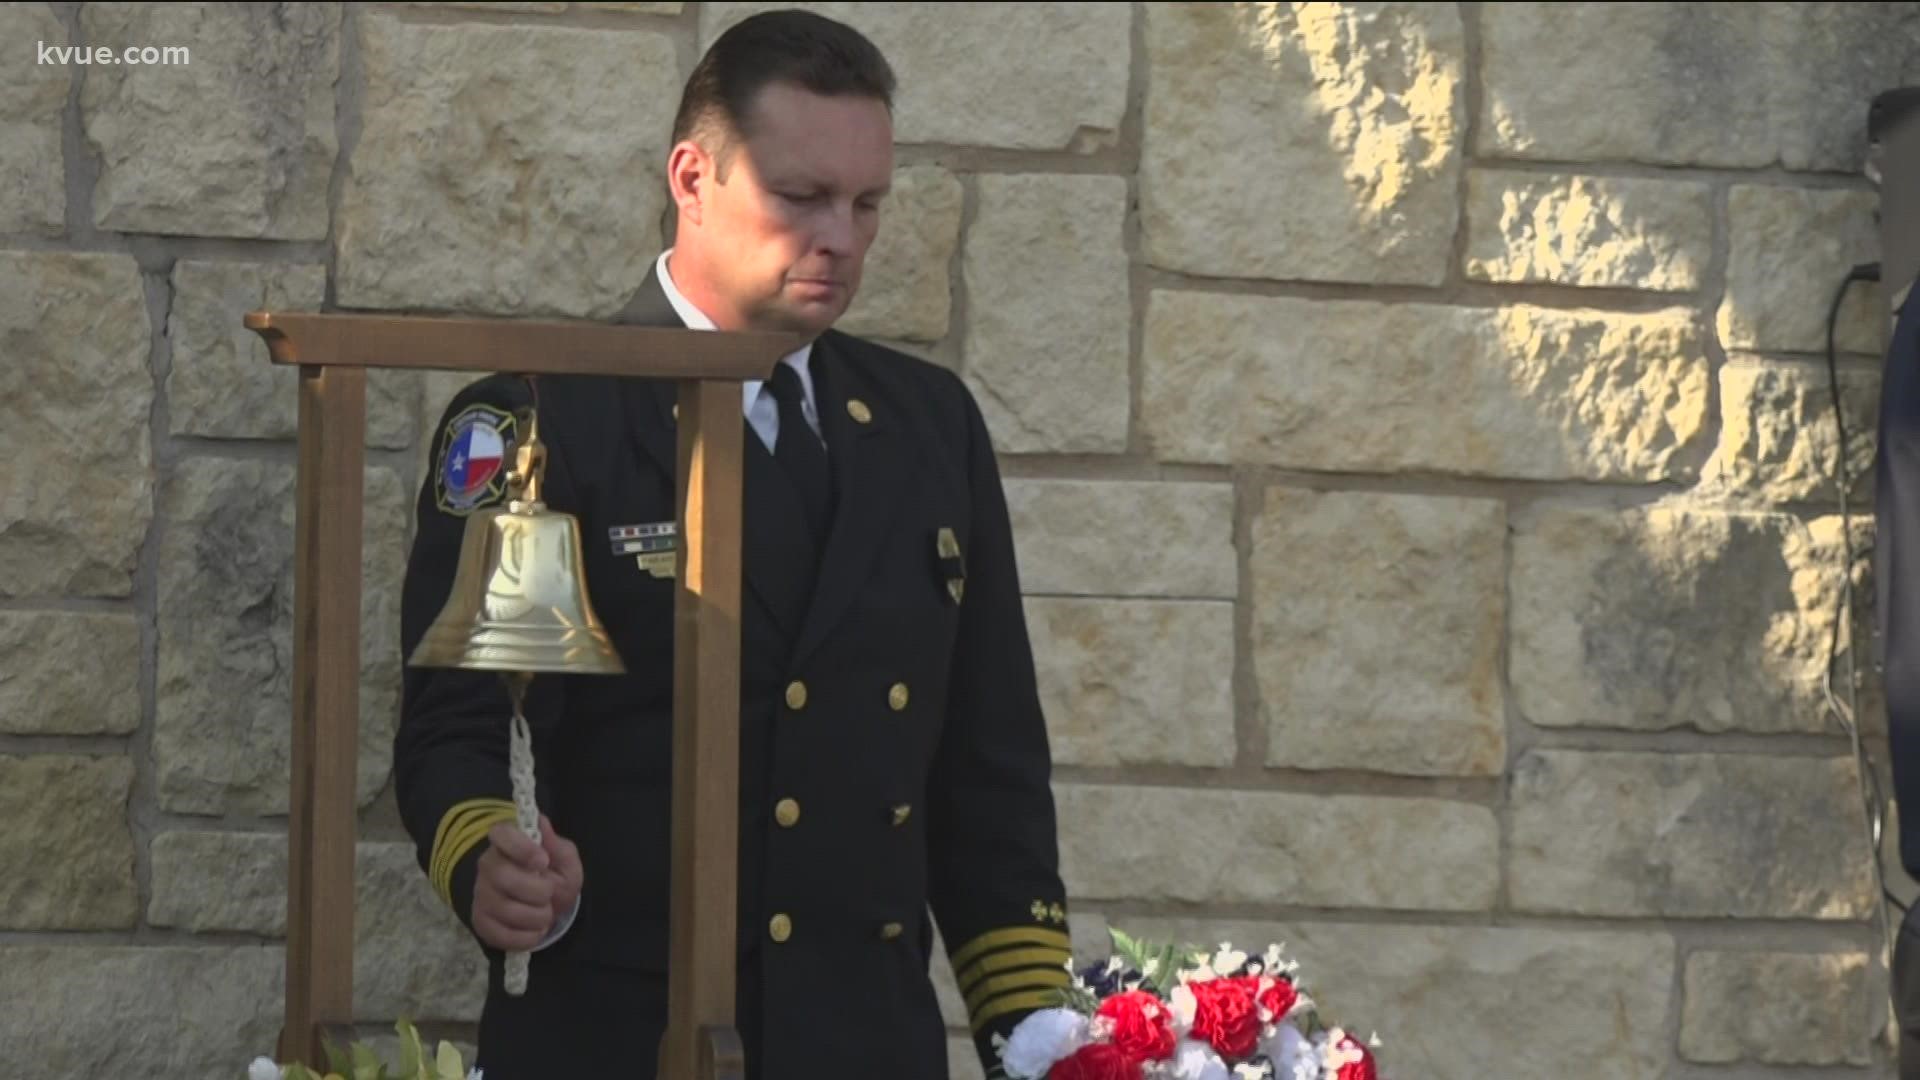 Every year since its formation, the American Legion Post hosts a memorial ceremony in Veterans Memorial Park in Cedar Park.